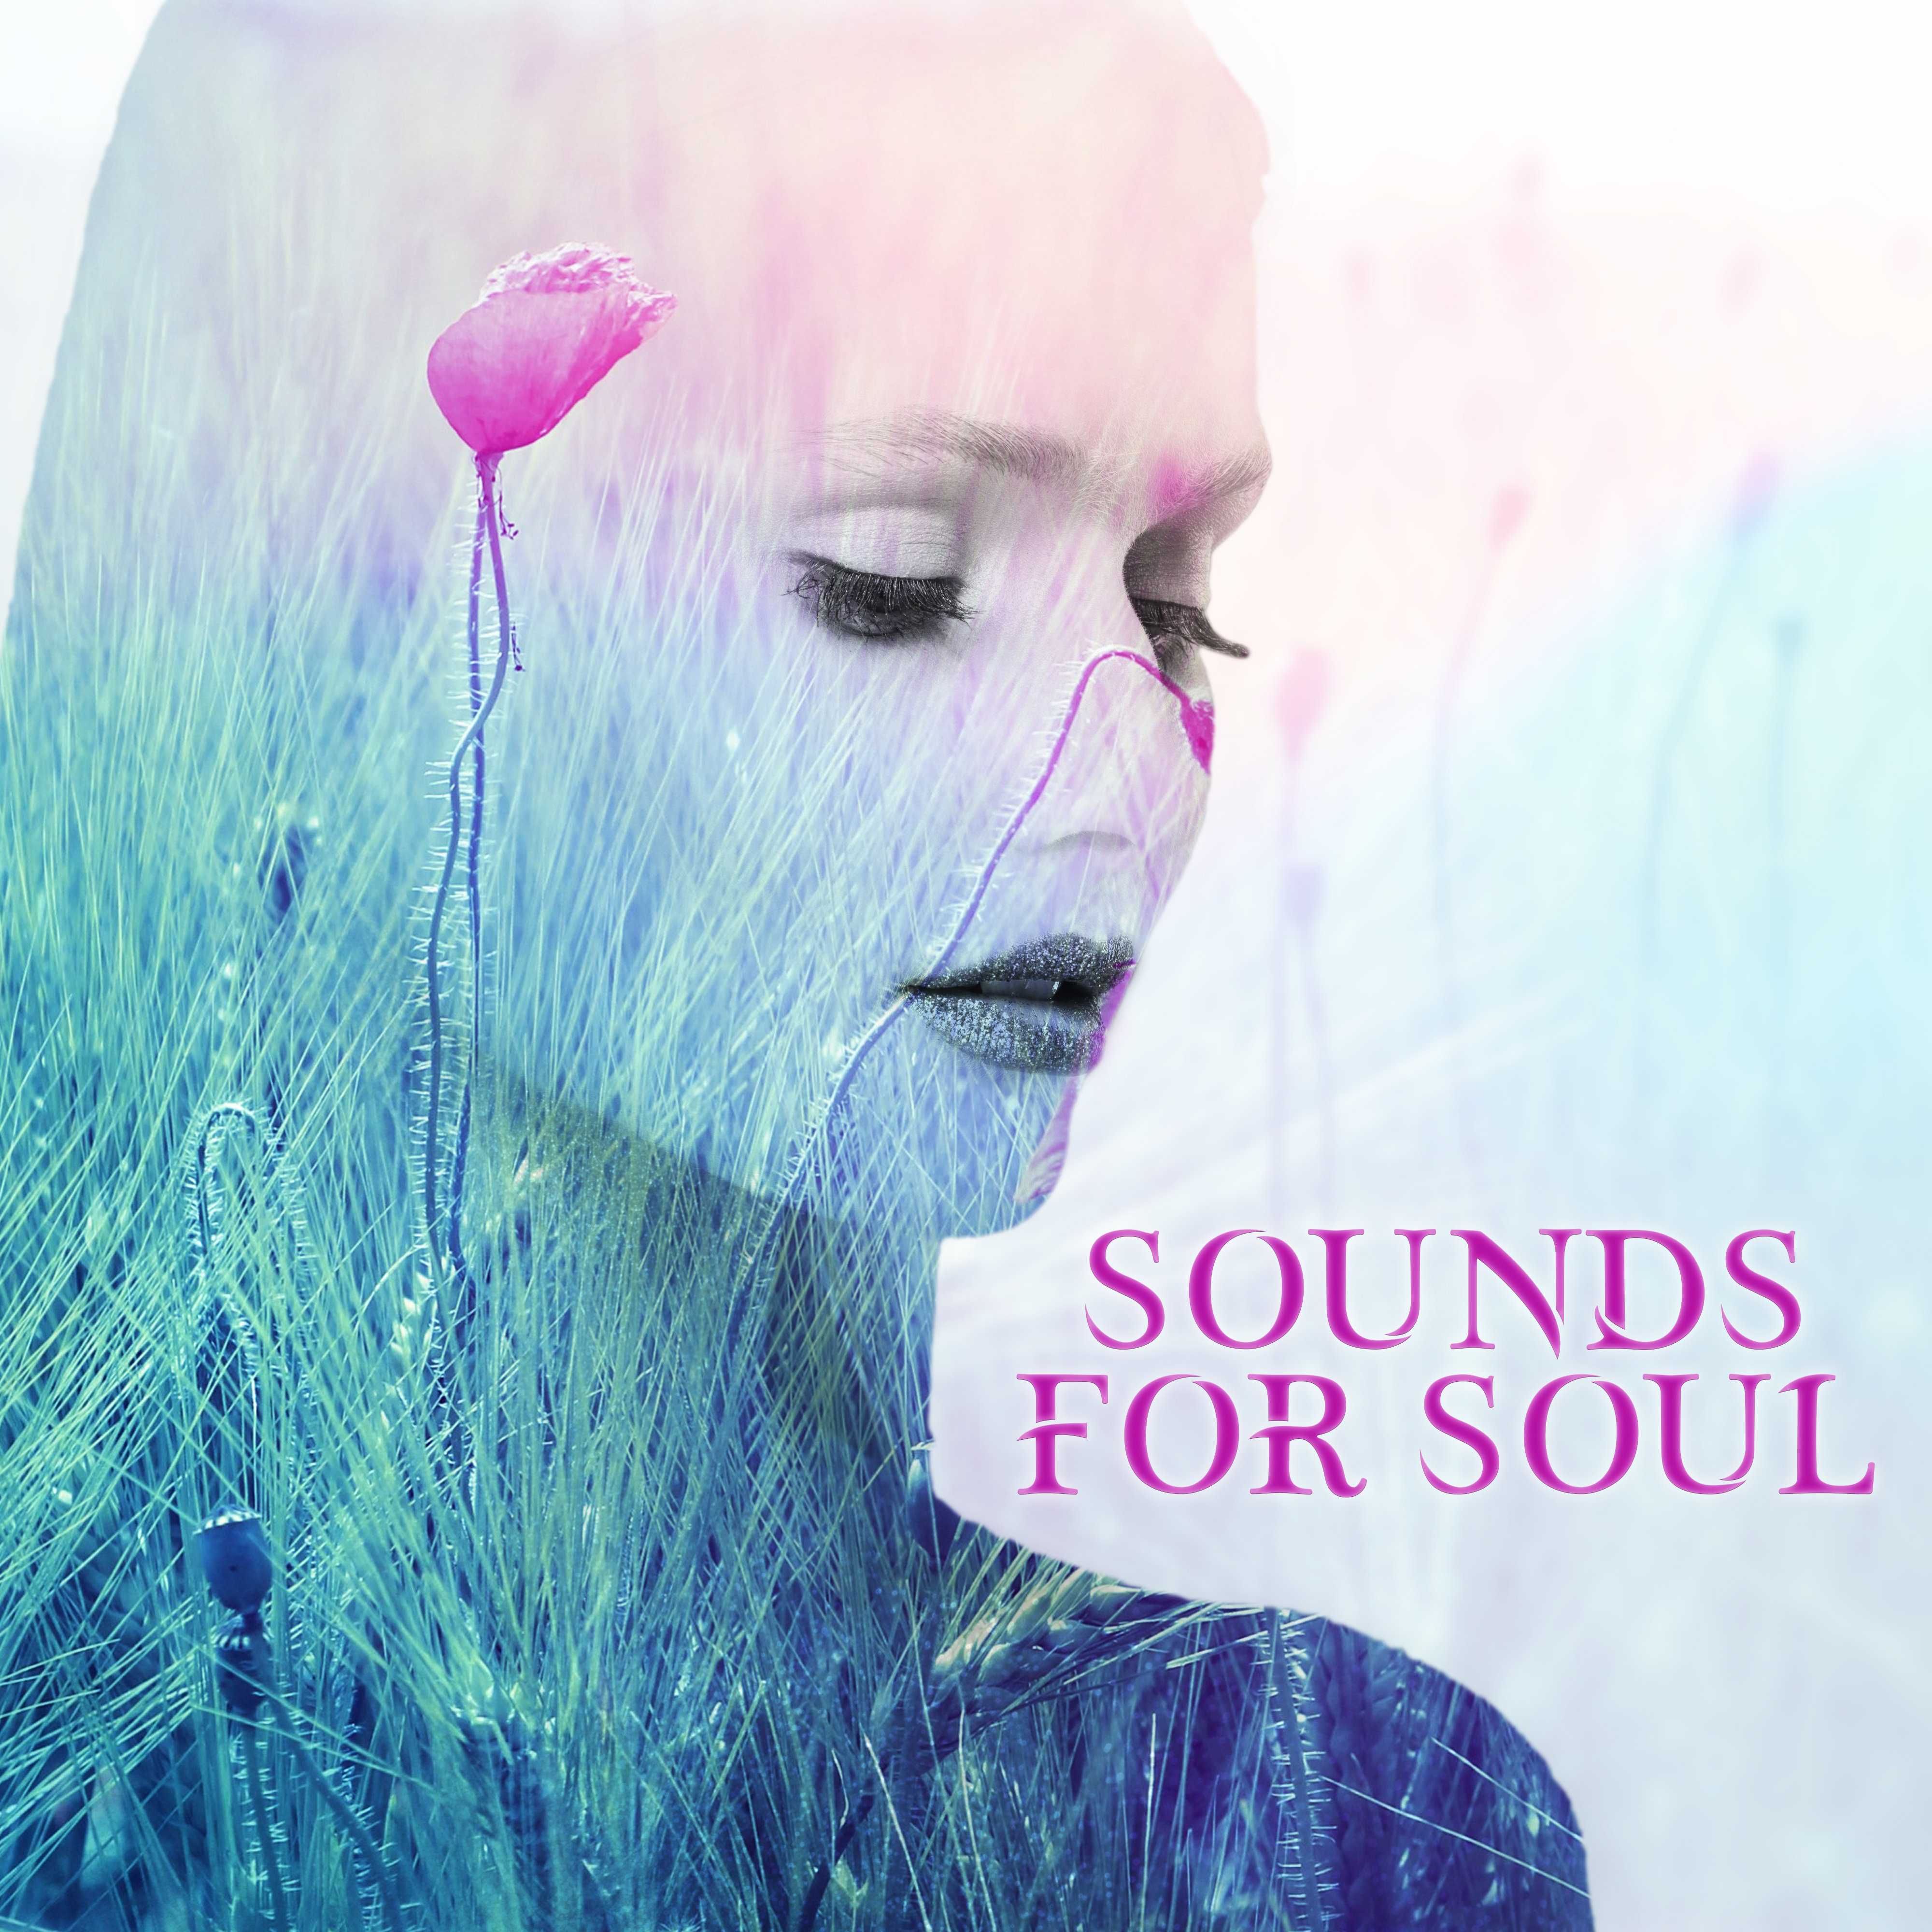 Sounds for Soul  Meditation Music, Hatha Yoga, Zen Spirit, Shades of Chakra, Peaceful Music to Relax